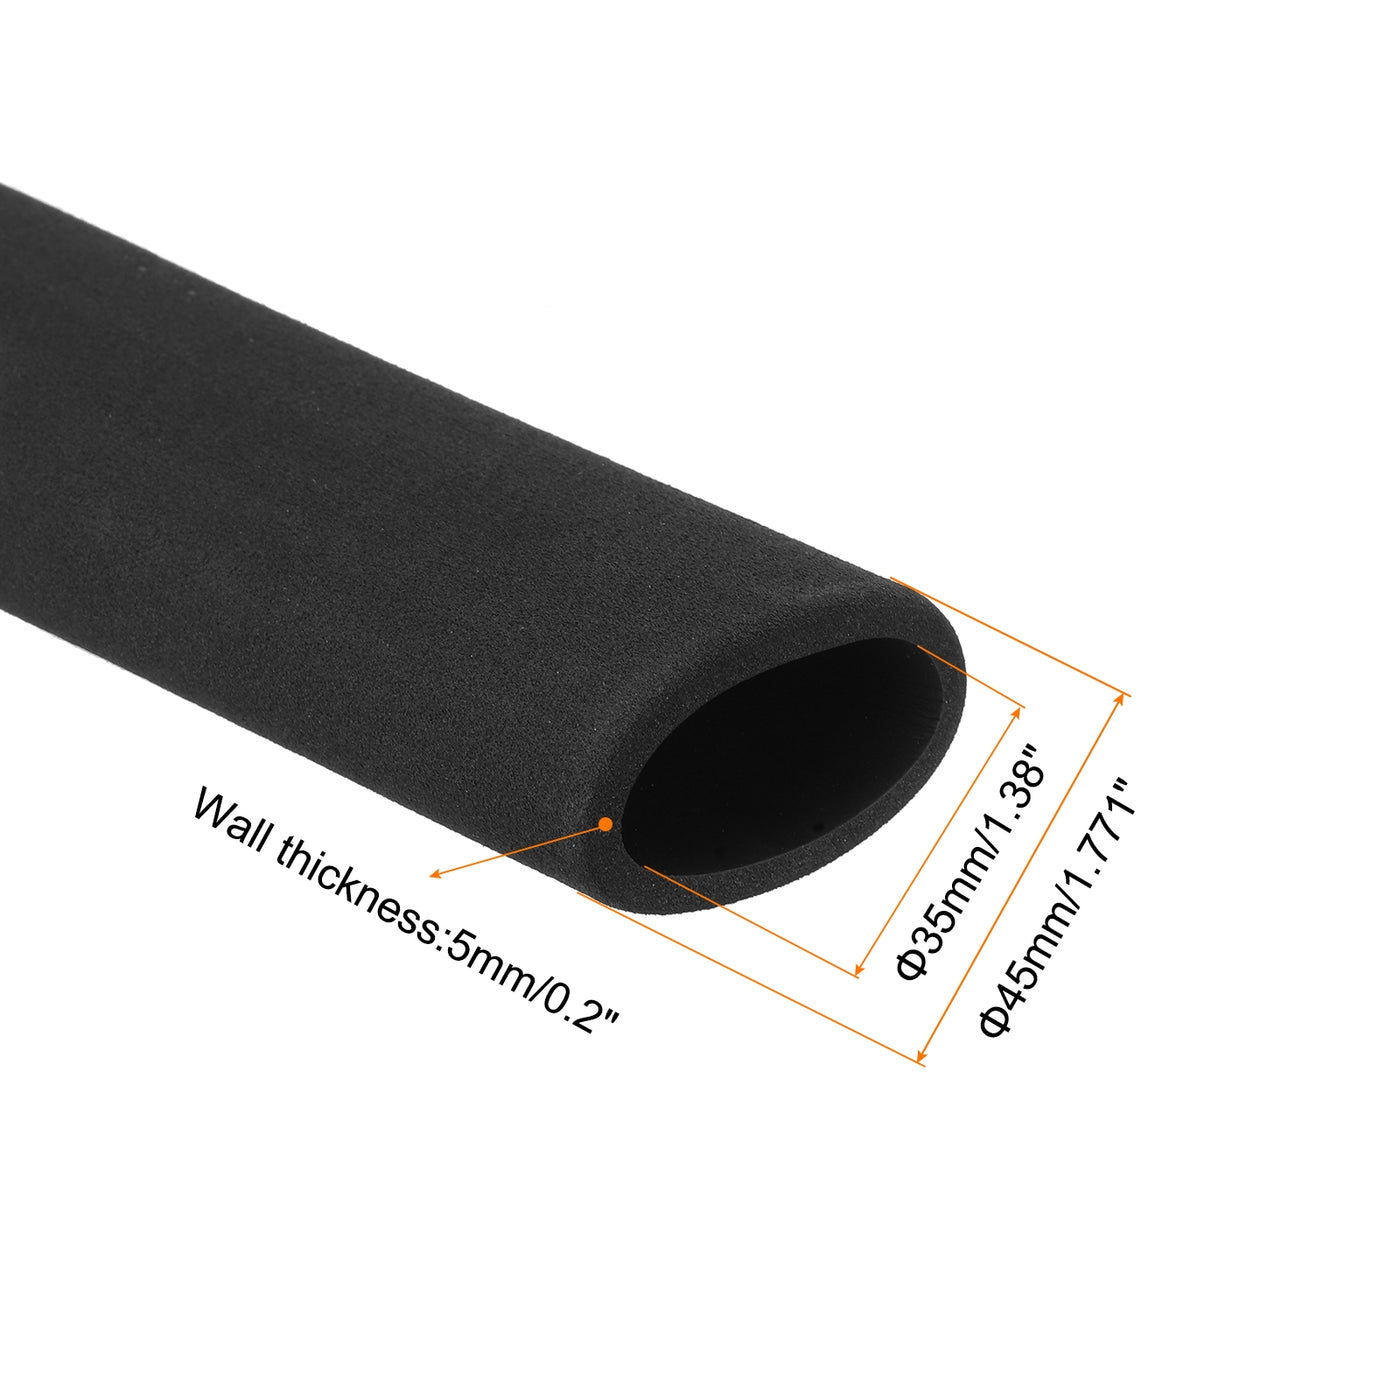 uxcell Uxcell Pipe Insulation Tube Foam Tubing for Handle Grip Support 35mm ID 45mm OD 295mm Heat Preservation Black 2pcs